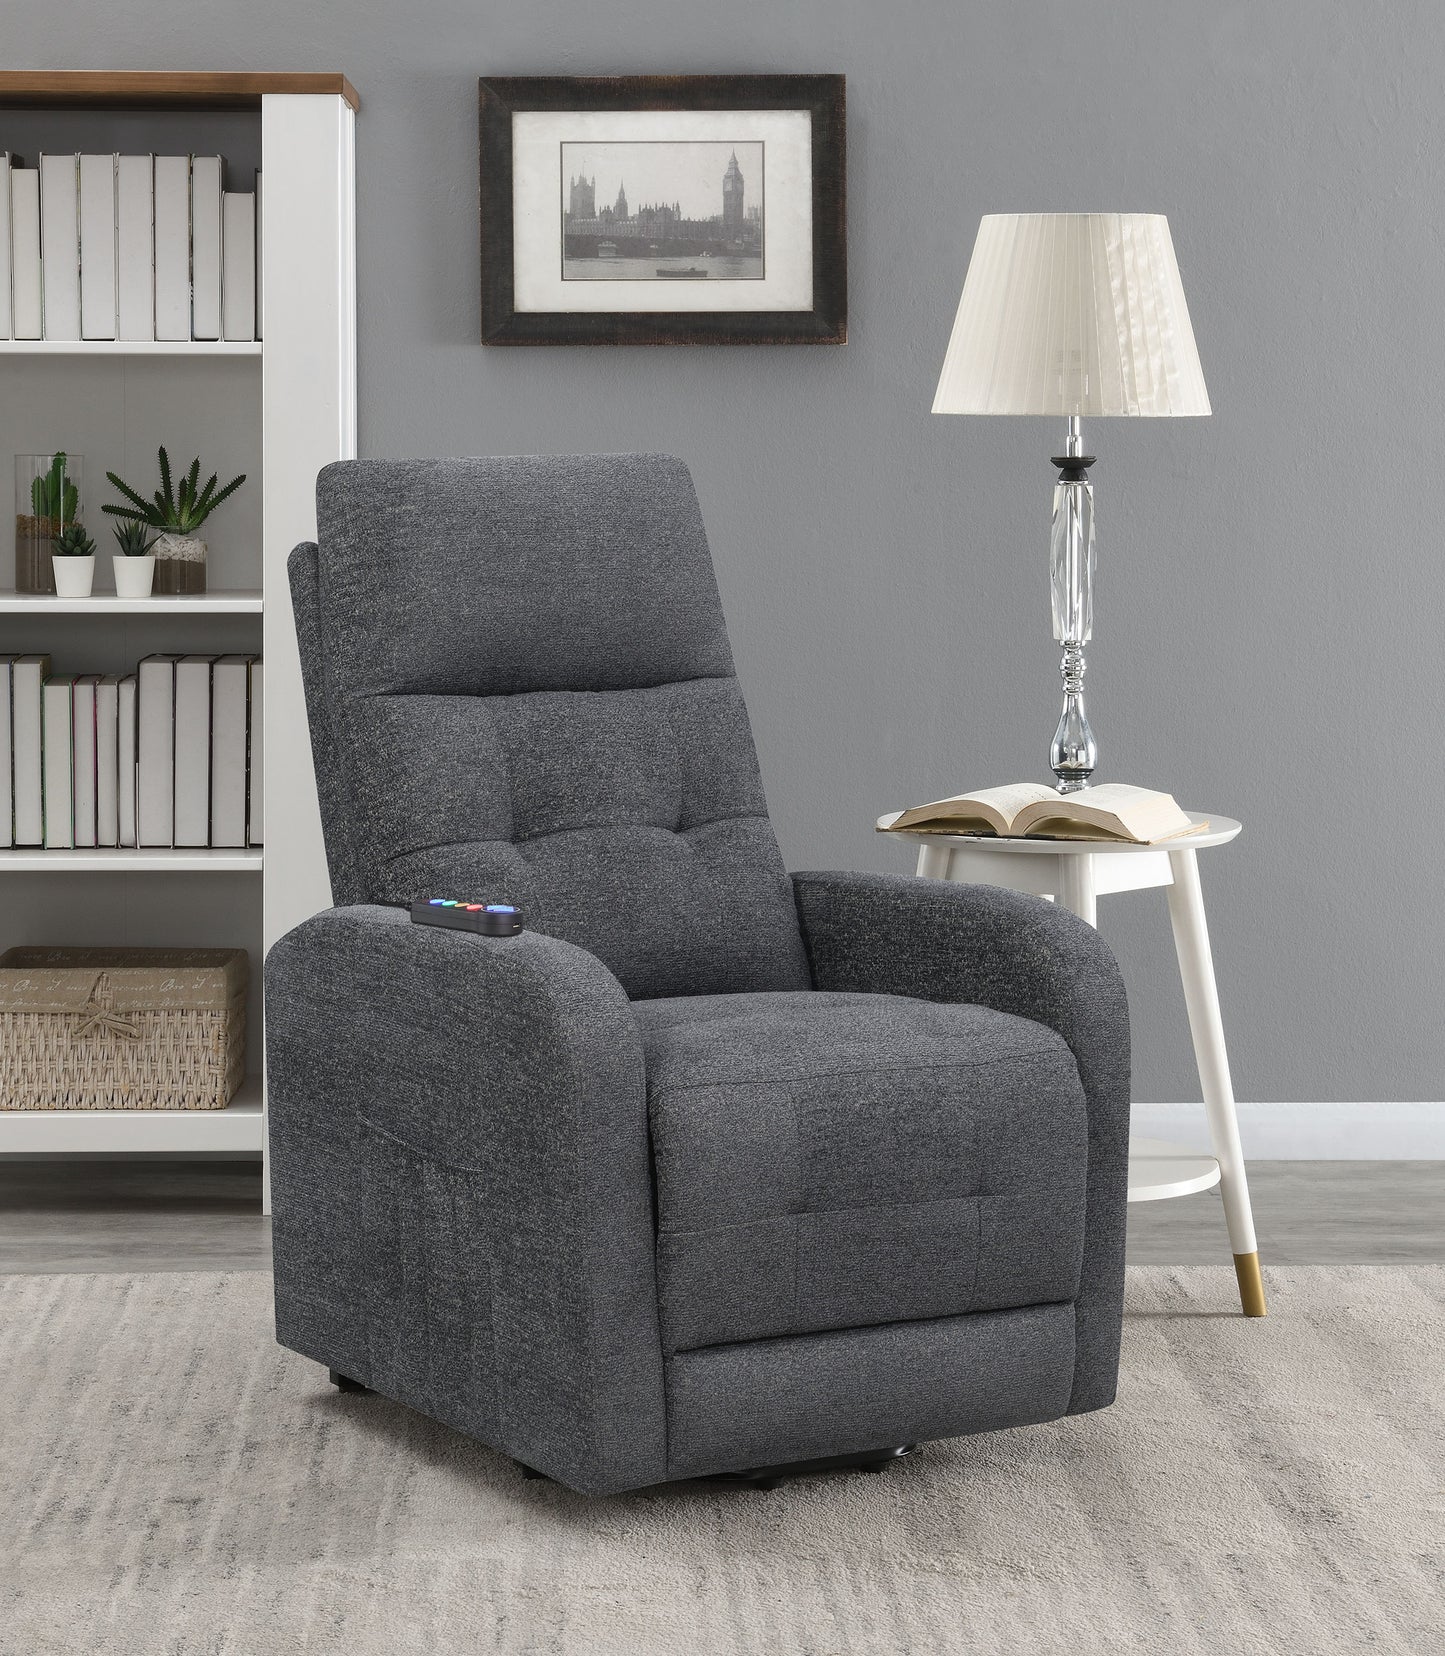 Howie Tufted Upholstered Power Lift Recliner Charcoal